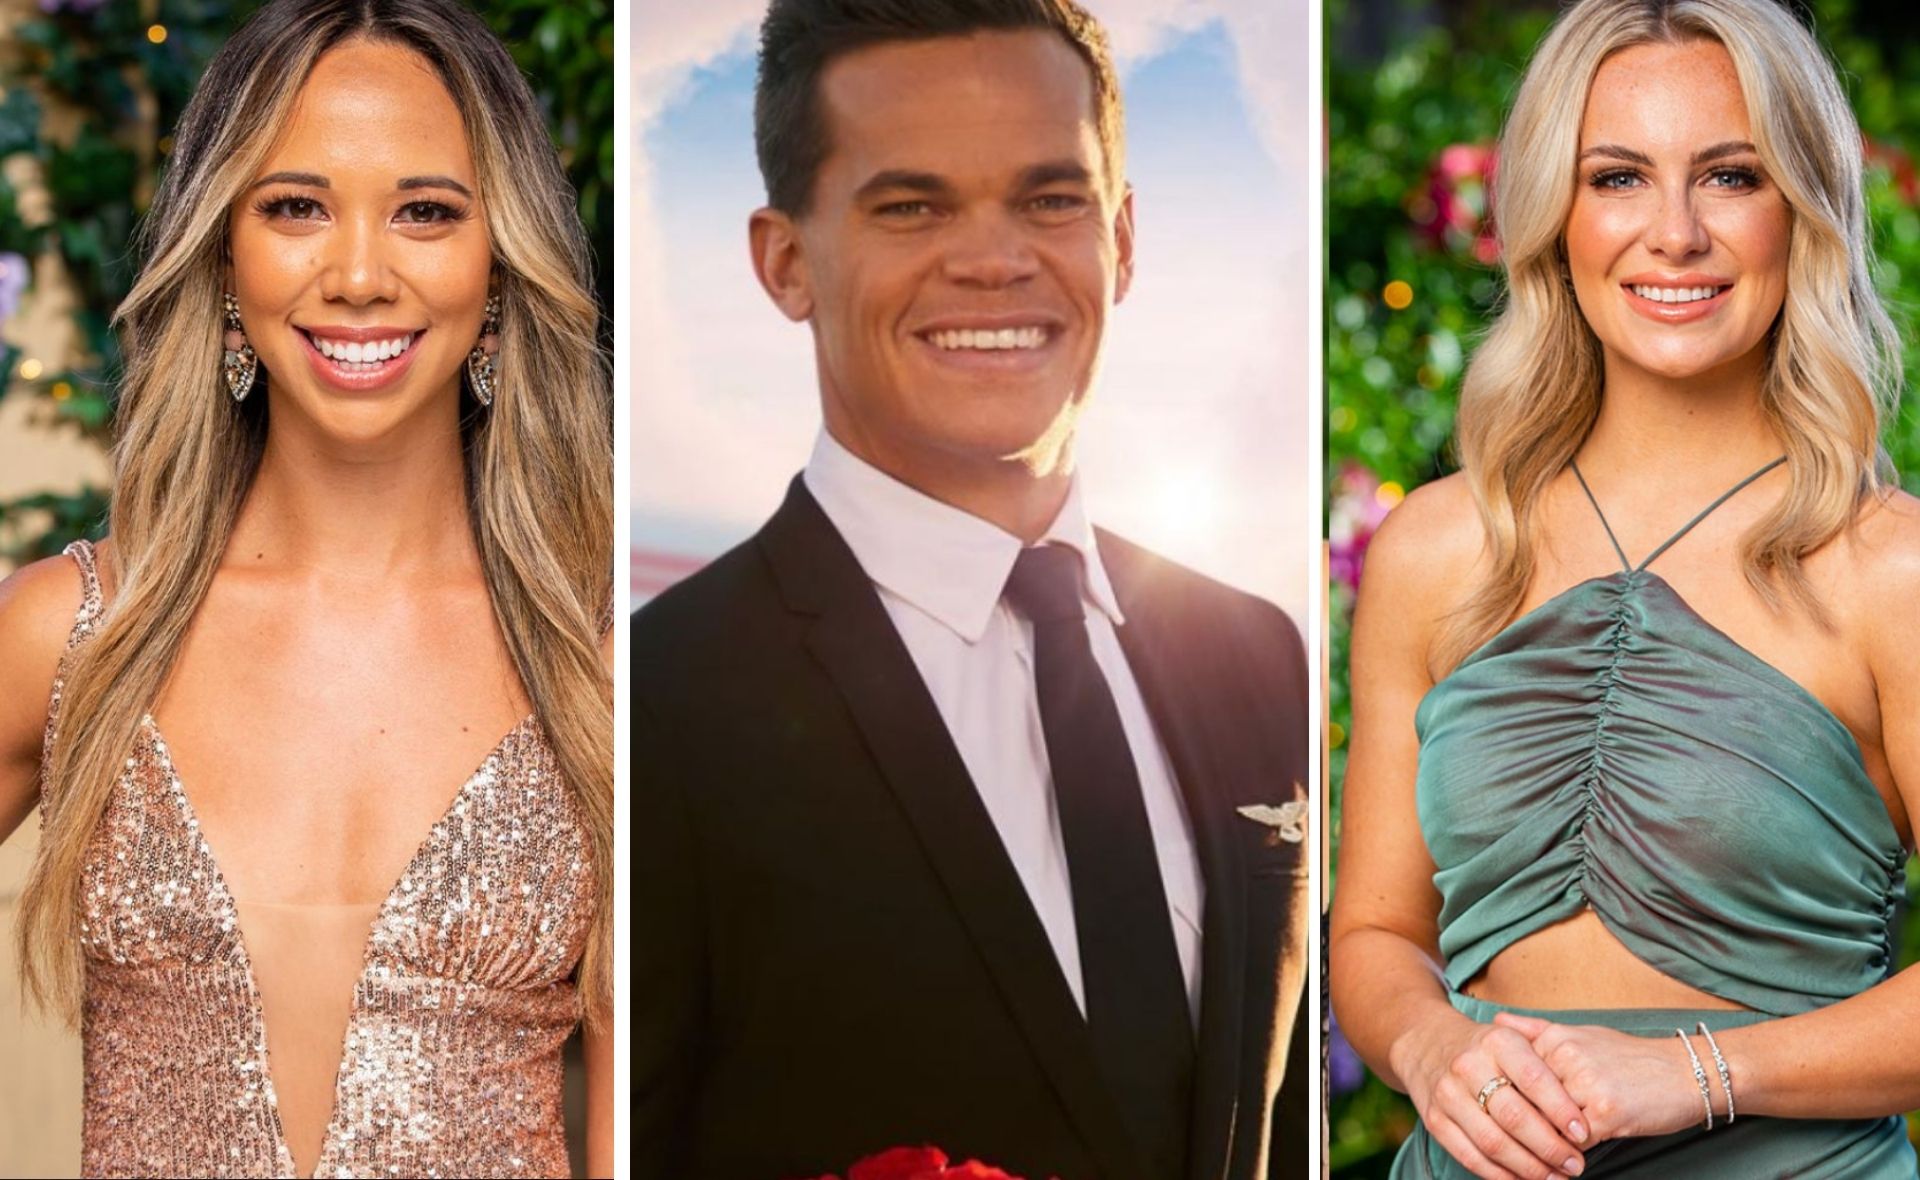 Will romantic cuts spell sartorial love? The dazzling and striking fashion moments from the 2021 Bachelor